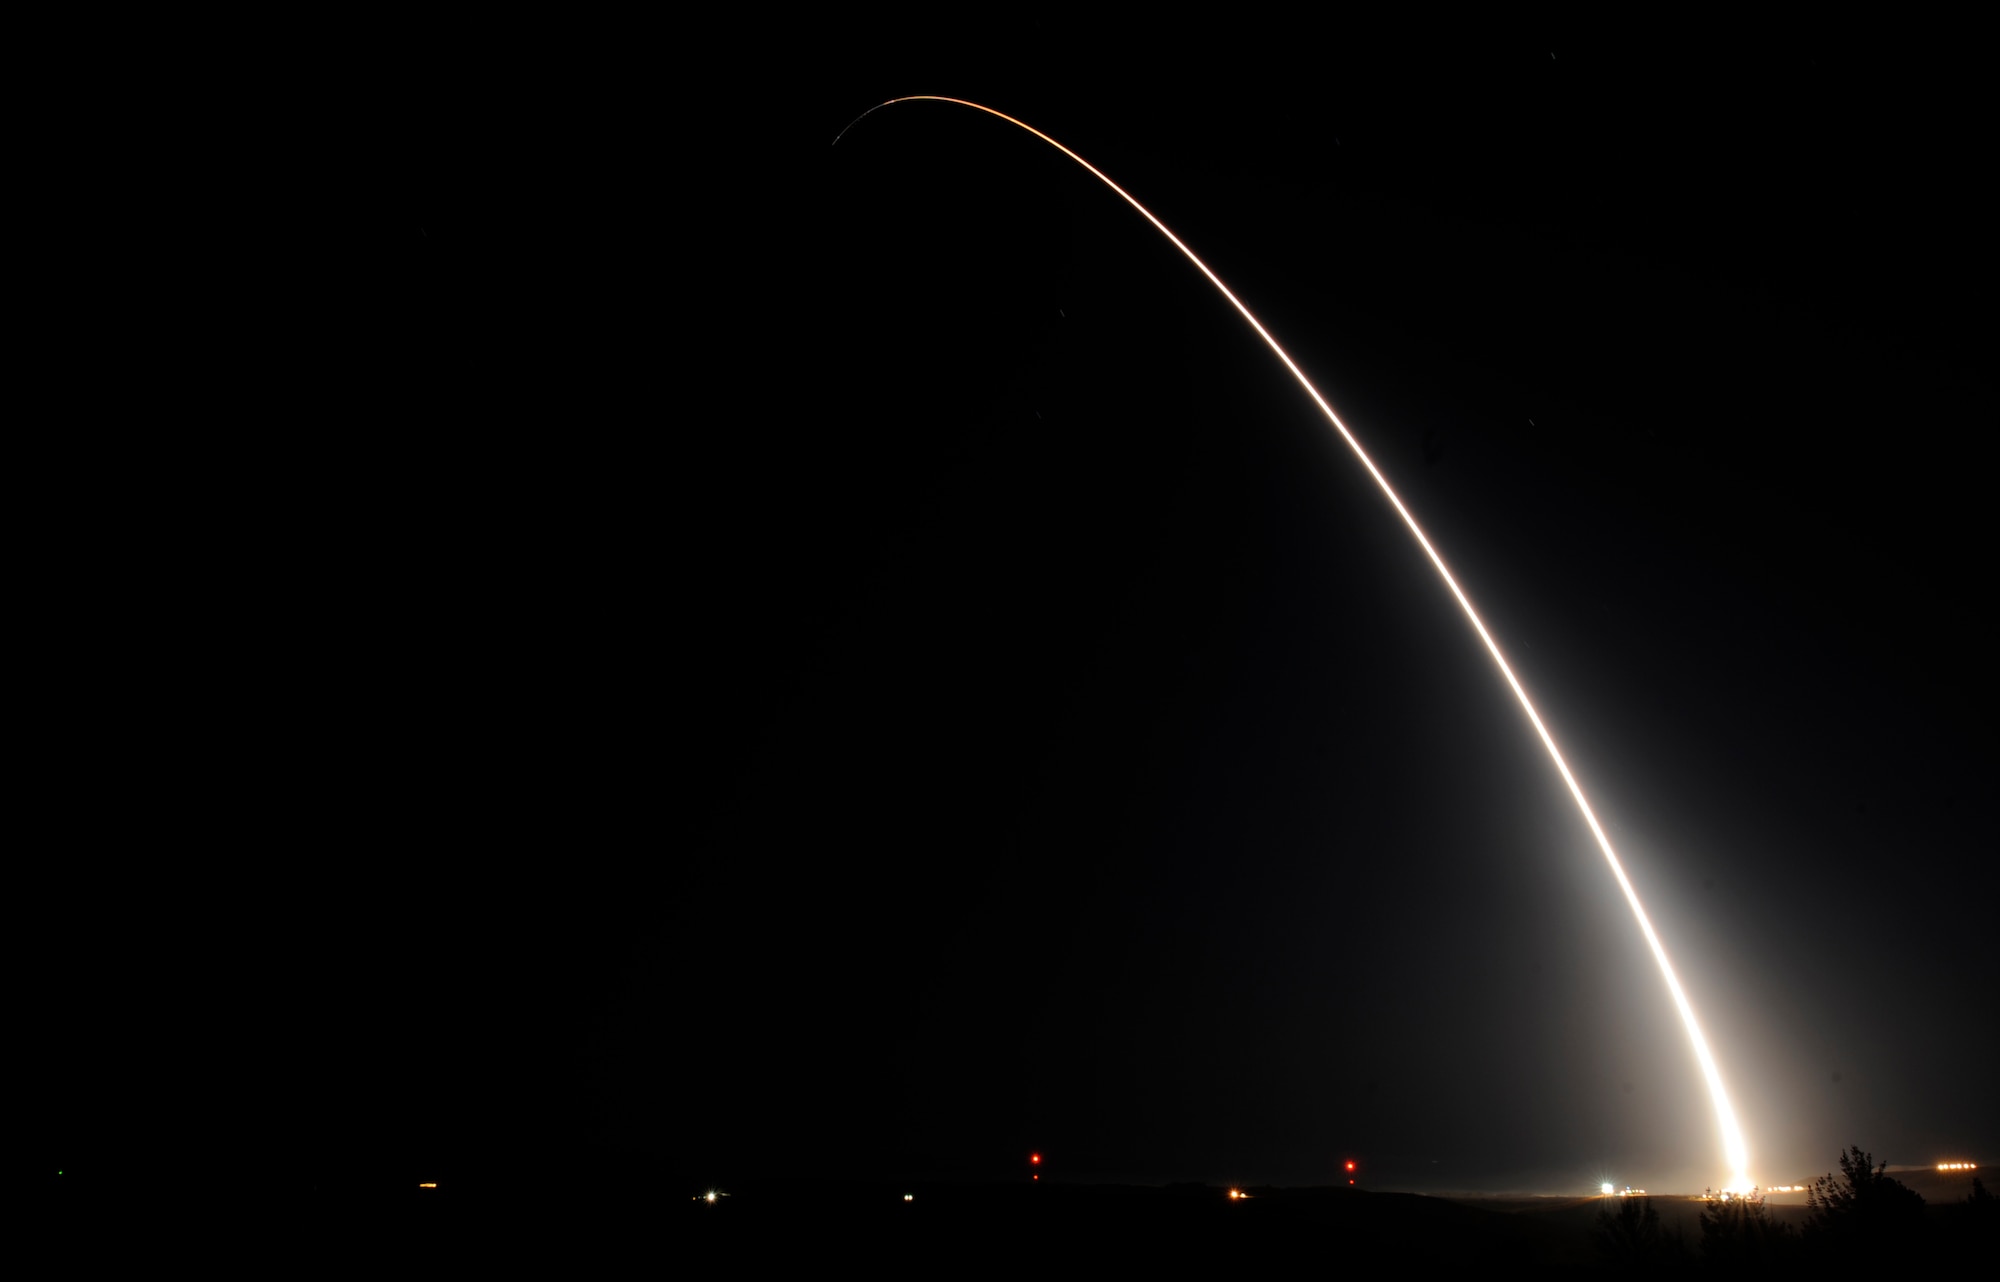 A team of Air Force Global Strike Command Airmen from the 90th Missile Wing at F.E. Warren Air Force Base, Wyo., launched an unarmed Minuteman III intercontinental ballistic missile equipped with a test reentry vehicle from Vandenberg Air Force Base, Calif., Oct. 21, 2015. The ICBM's reentry vehicle, which contained a telemetry package used for operational testing, traveled approximately 4,200 miles to the Kwajalein Atoll in the Marshall Islands. Test launches verify the accuracy and reliability of the ICBM weapon system, providing valuable data to ensure a continued safe, secure and effective nuclear deterrent. (U.S. Air Force photo/Airman 1st Class Ian Dudley)